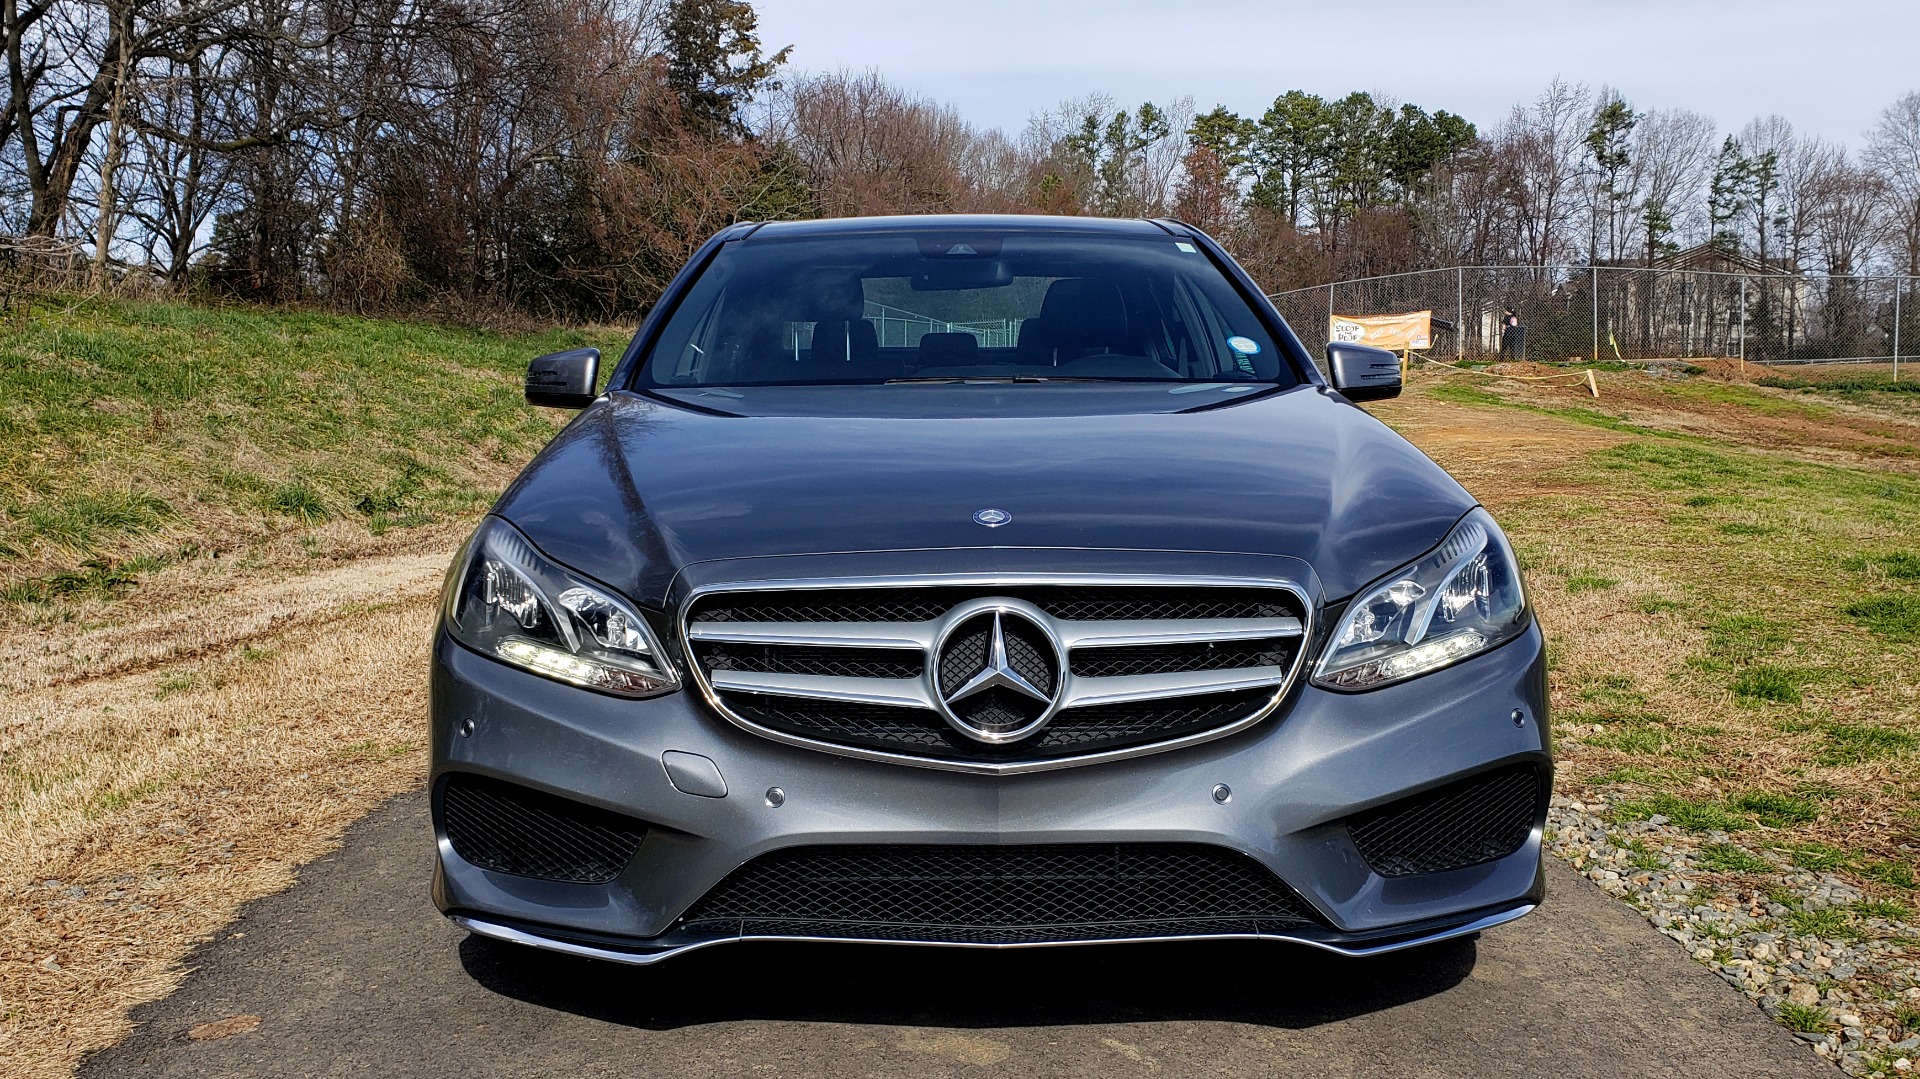 Used 2016 Mercedes-Benz E-CLASS E 350 PREM / KEYLESS-GO / NAV / SUNROOF / REARVIEW for sale Sold at Formula Imports in Charlotte NC 28227 9